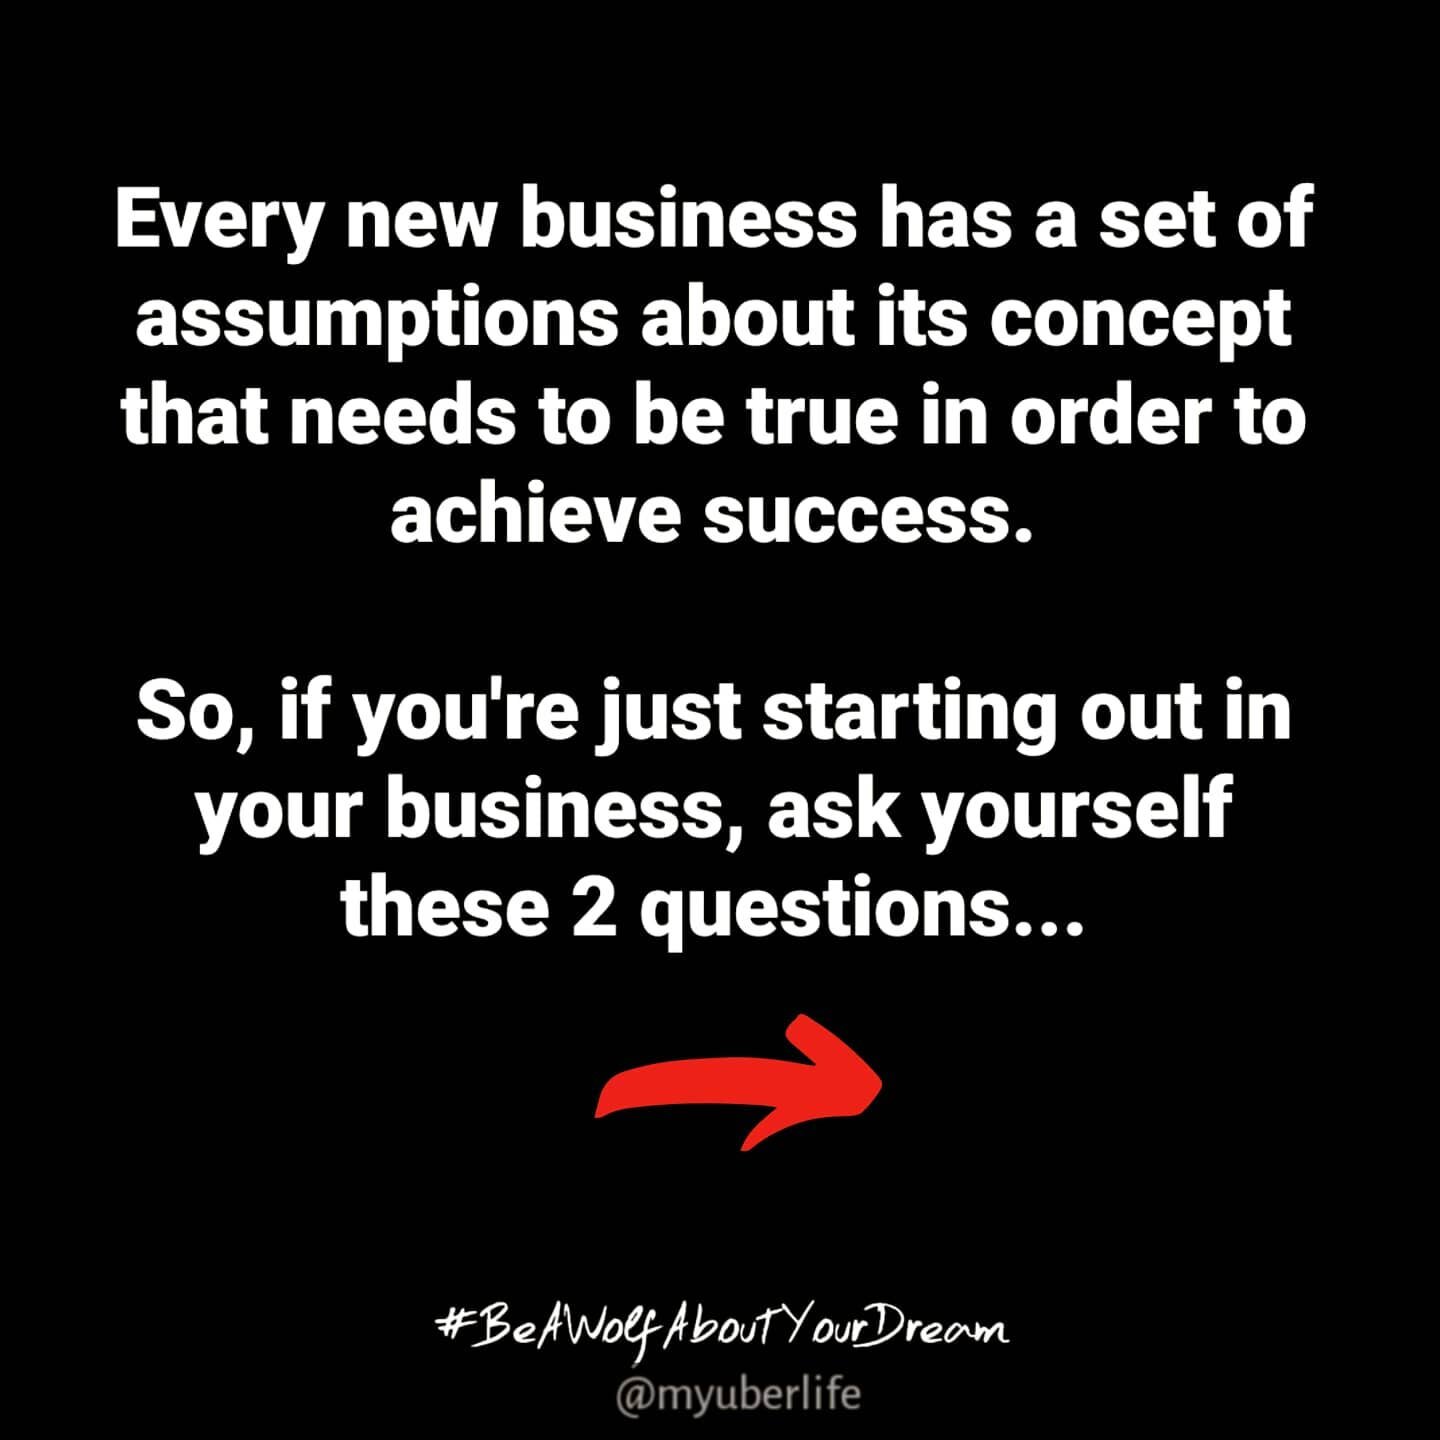 A business's assumptions will vary from depending on the type of business model in question. However, most assumptions will center around some aspect of market size and the strength of customer demand.
-
For the most part, if you have a big market, a